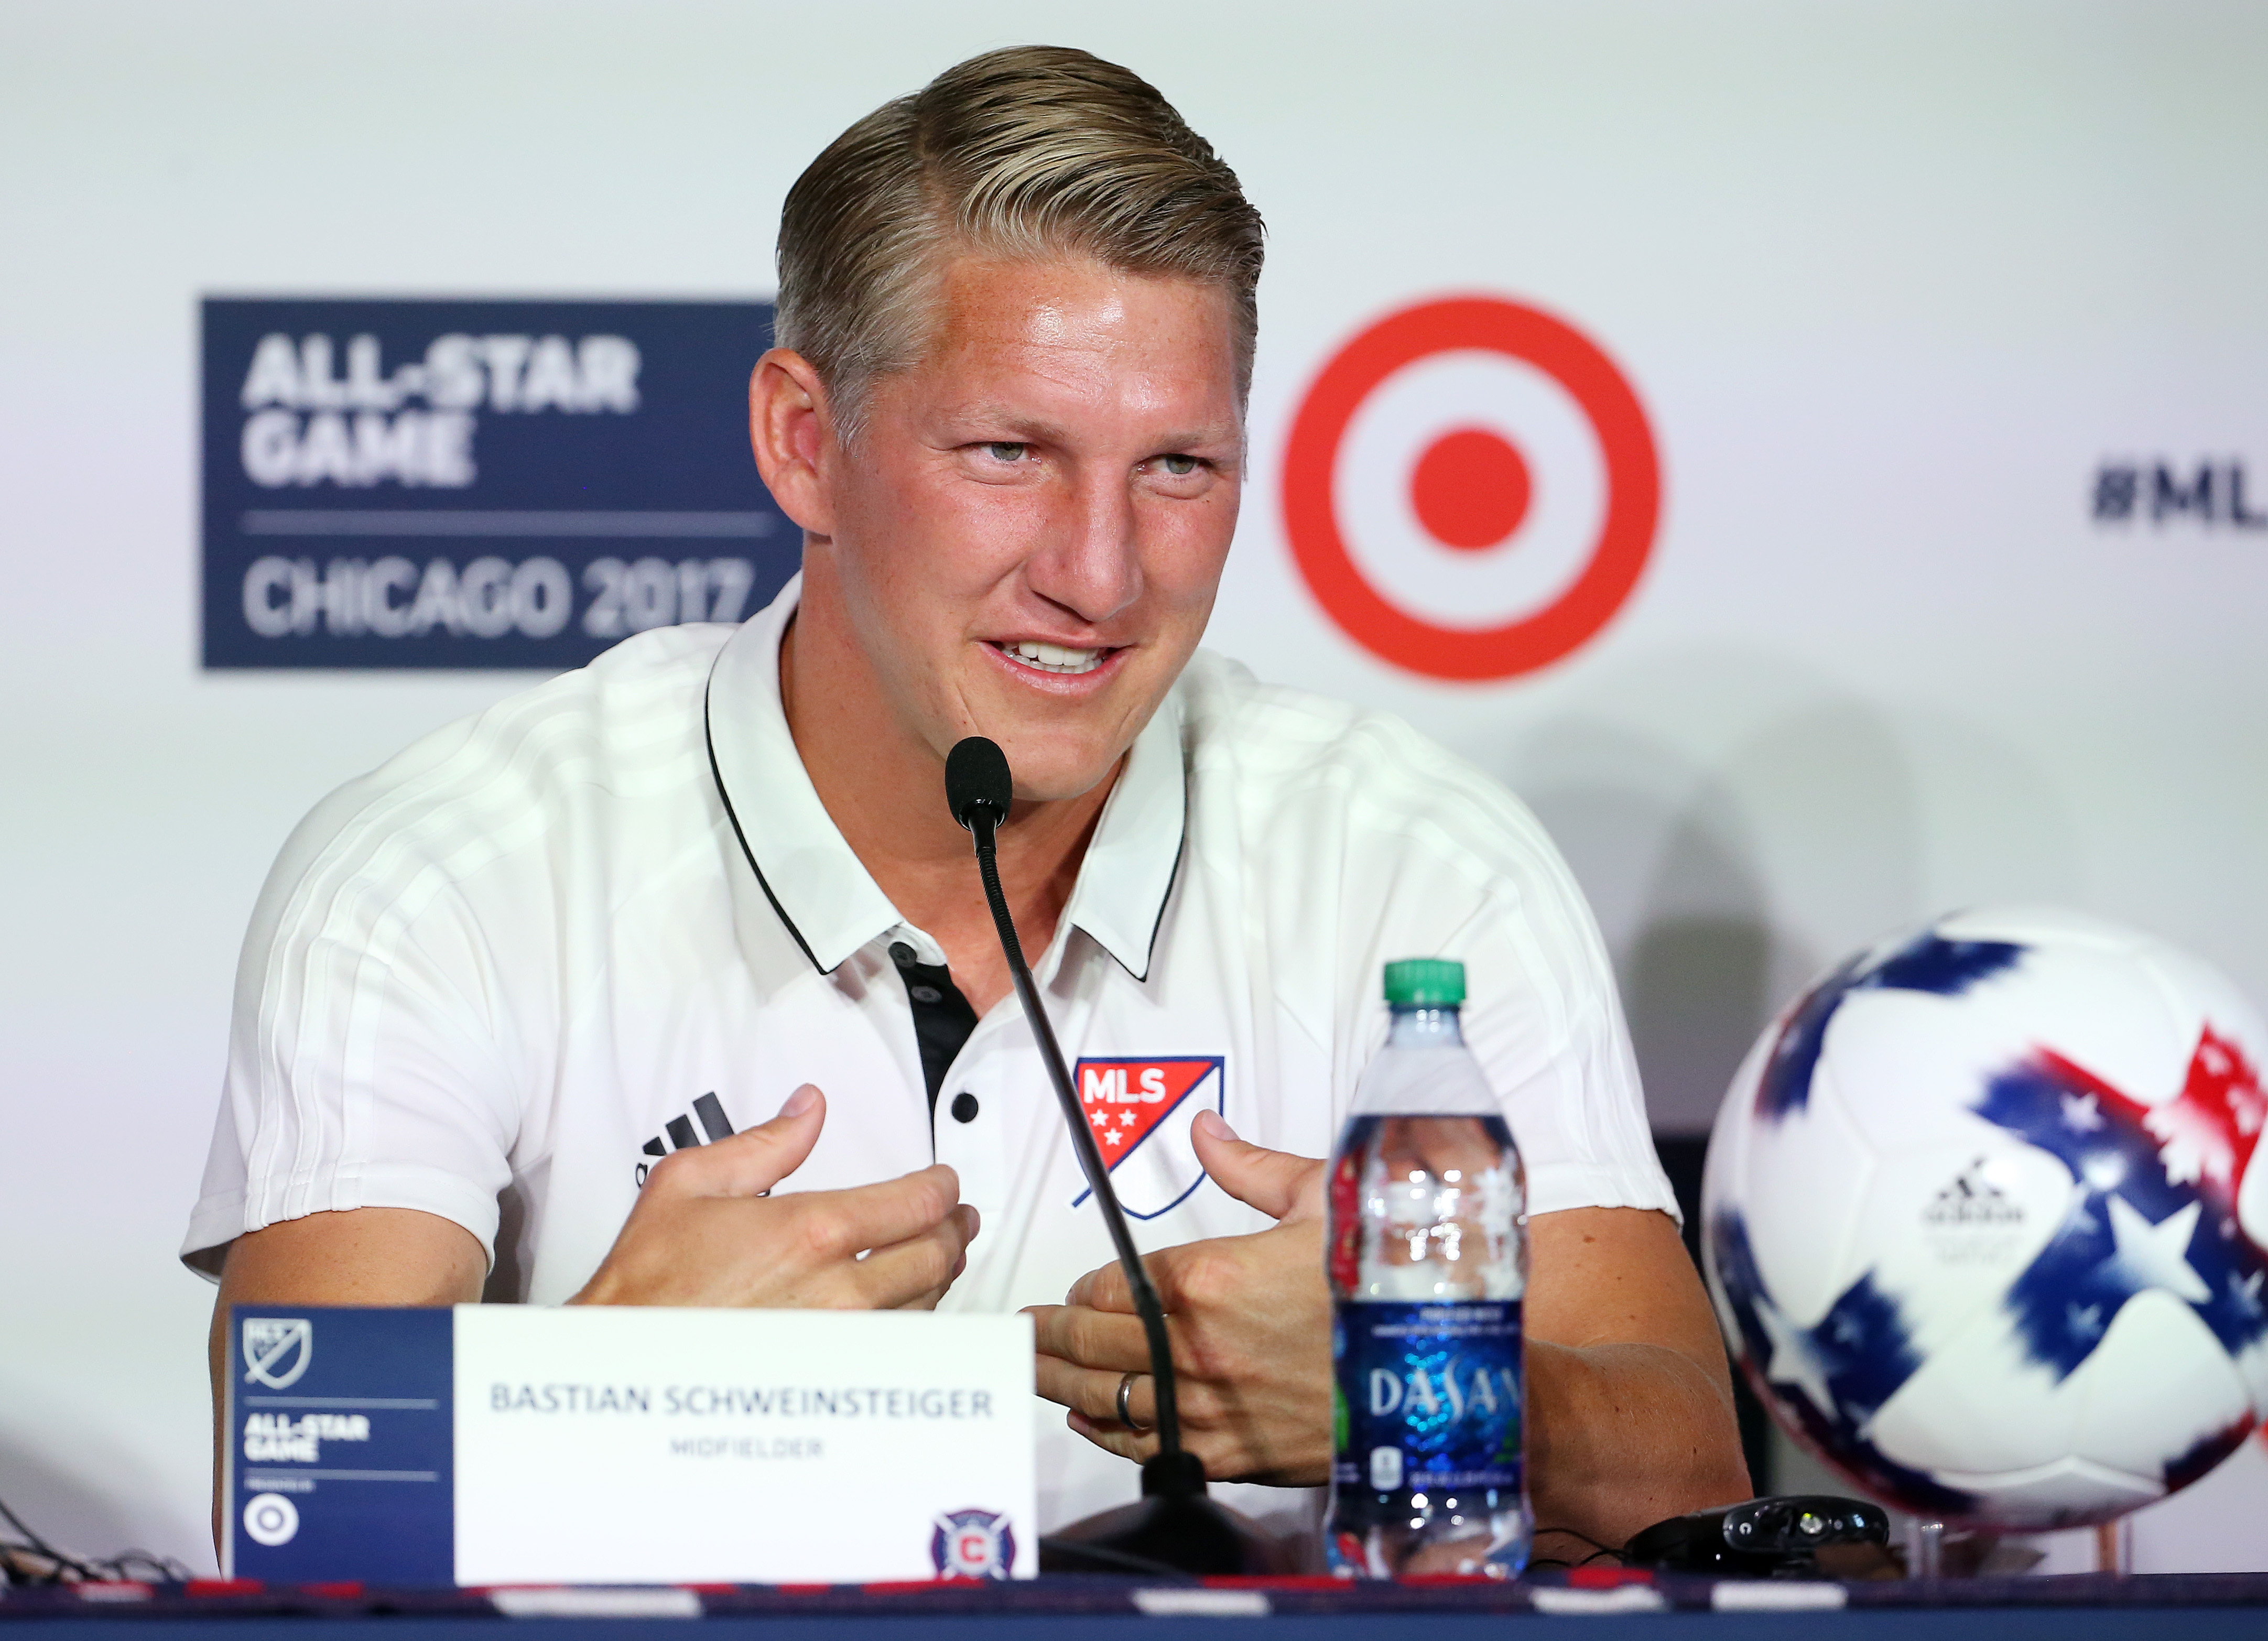 MLS: MLS All-Star-Joint Team Press Conference